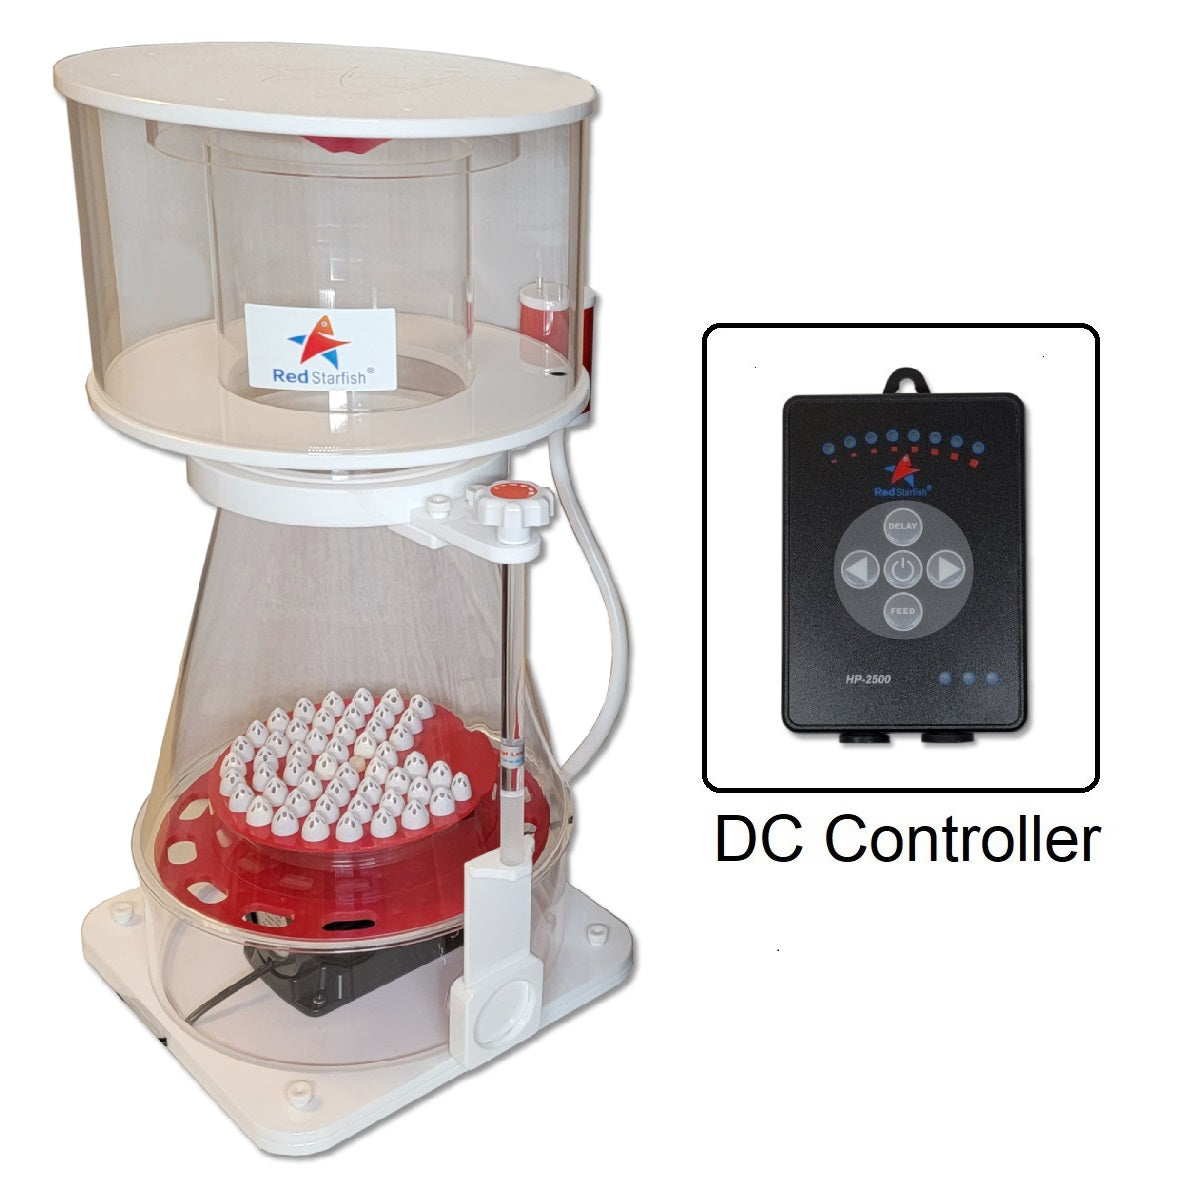 Red Star Fish RS-C9+ DC Protein Skimmer